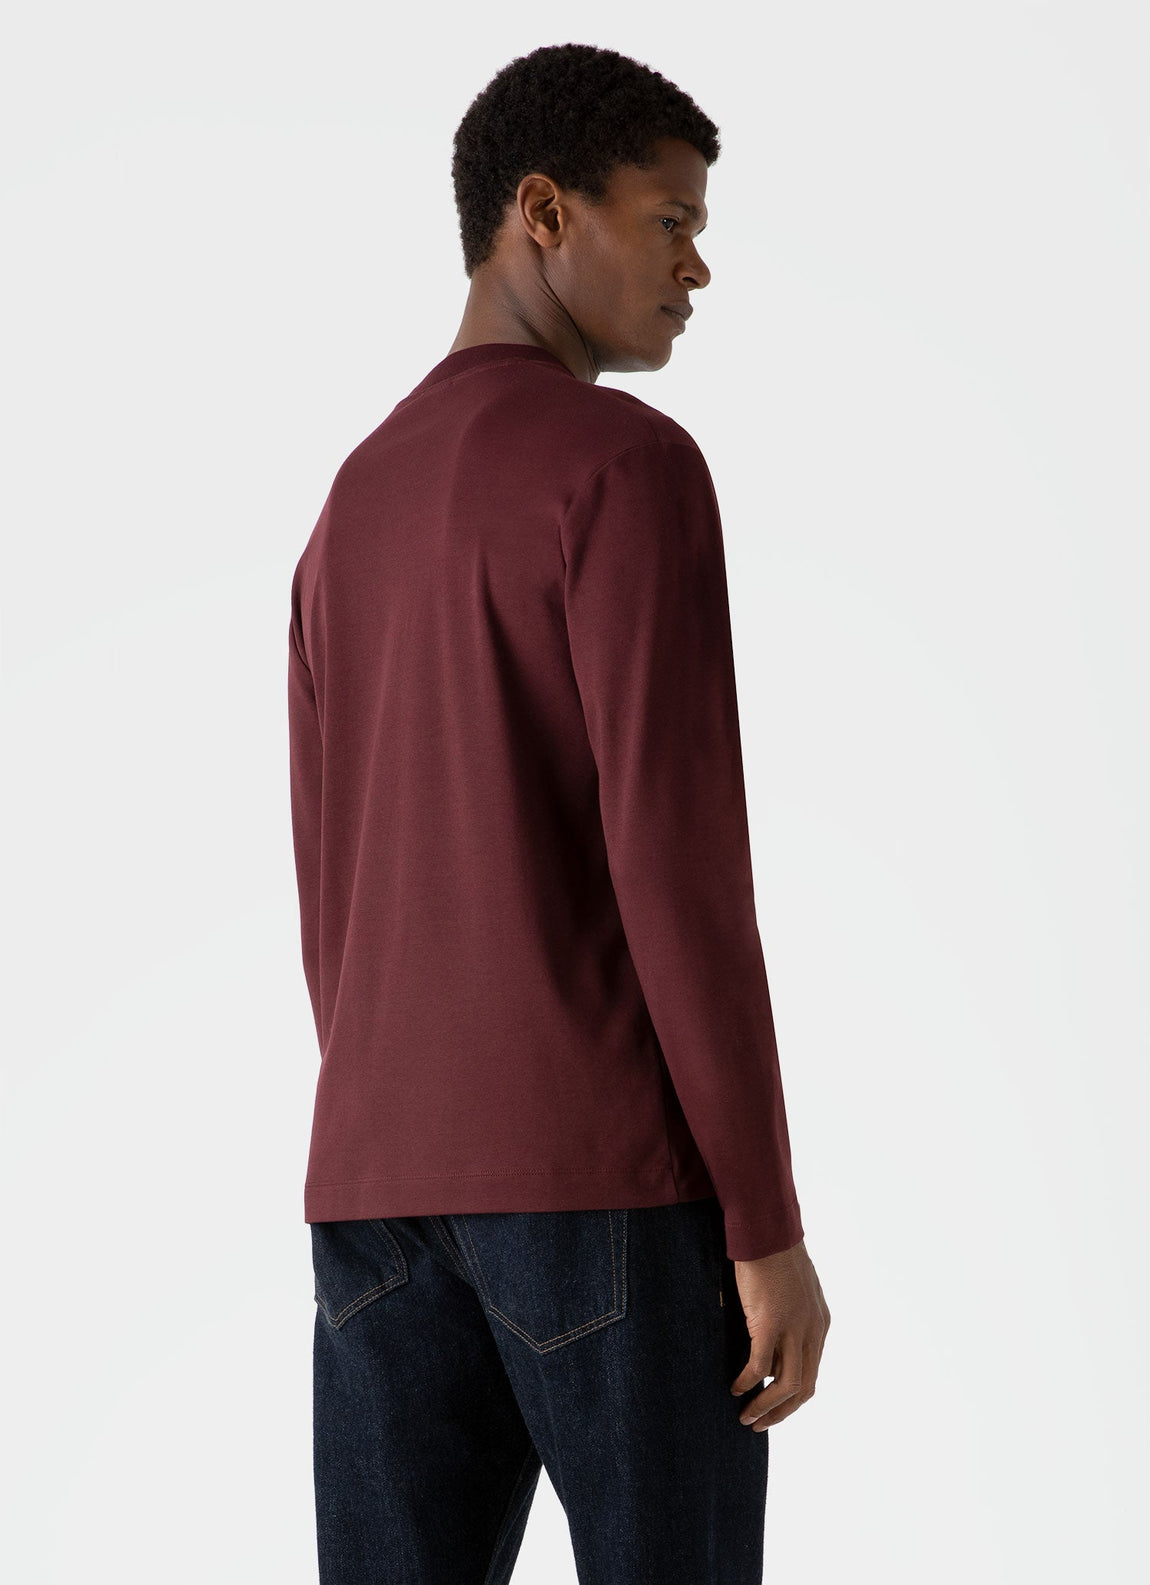 Men's Brushed Cotton Long Sleeve T-shirt in Maroon